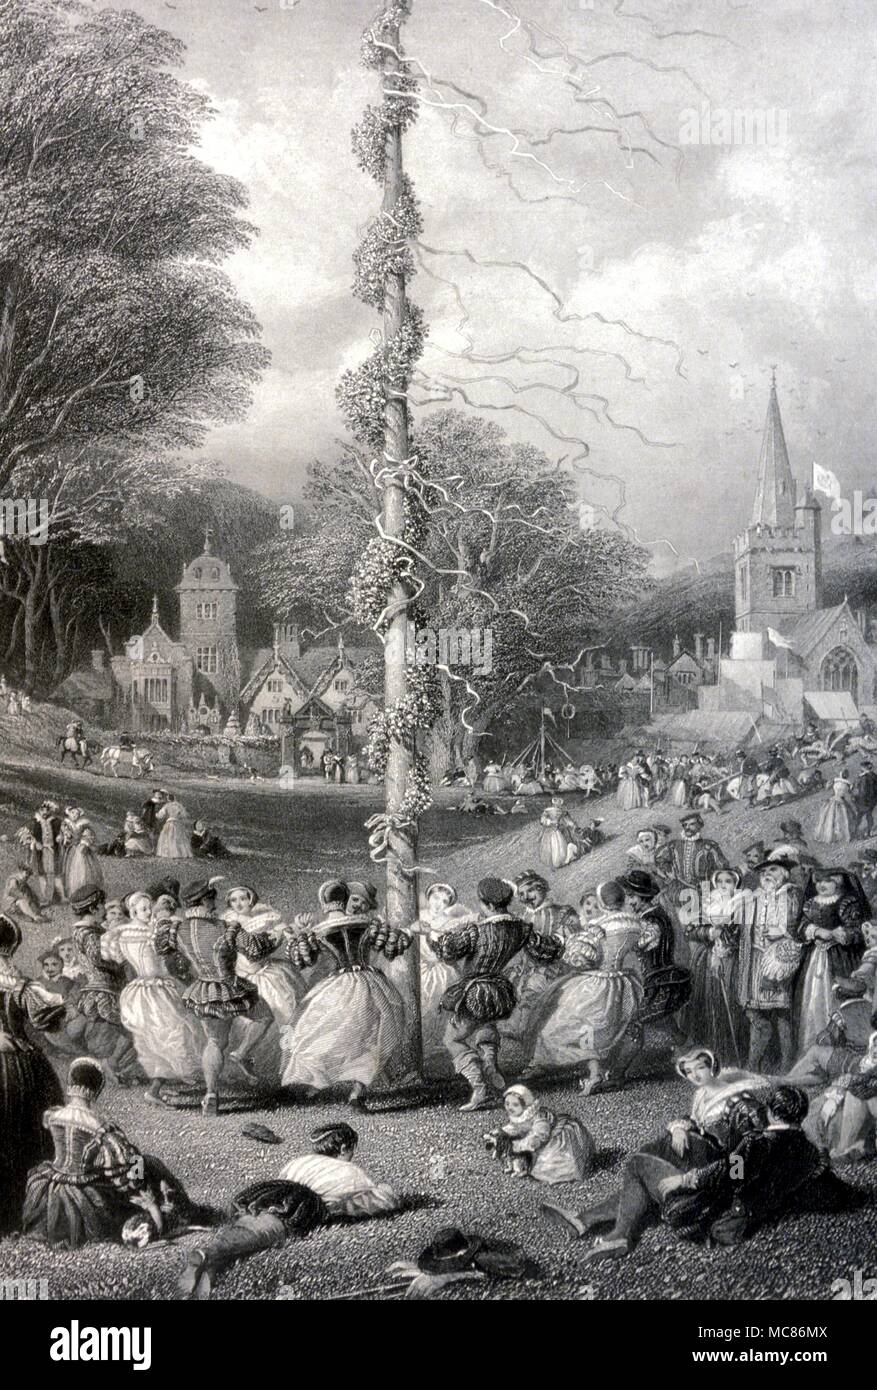 Maypole dancing. Engraving by C Cousen after the painting by Joseph Nash, 'The May-Pole'. From the 1866 'Art Journal' Stock Photo